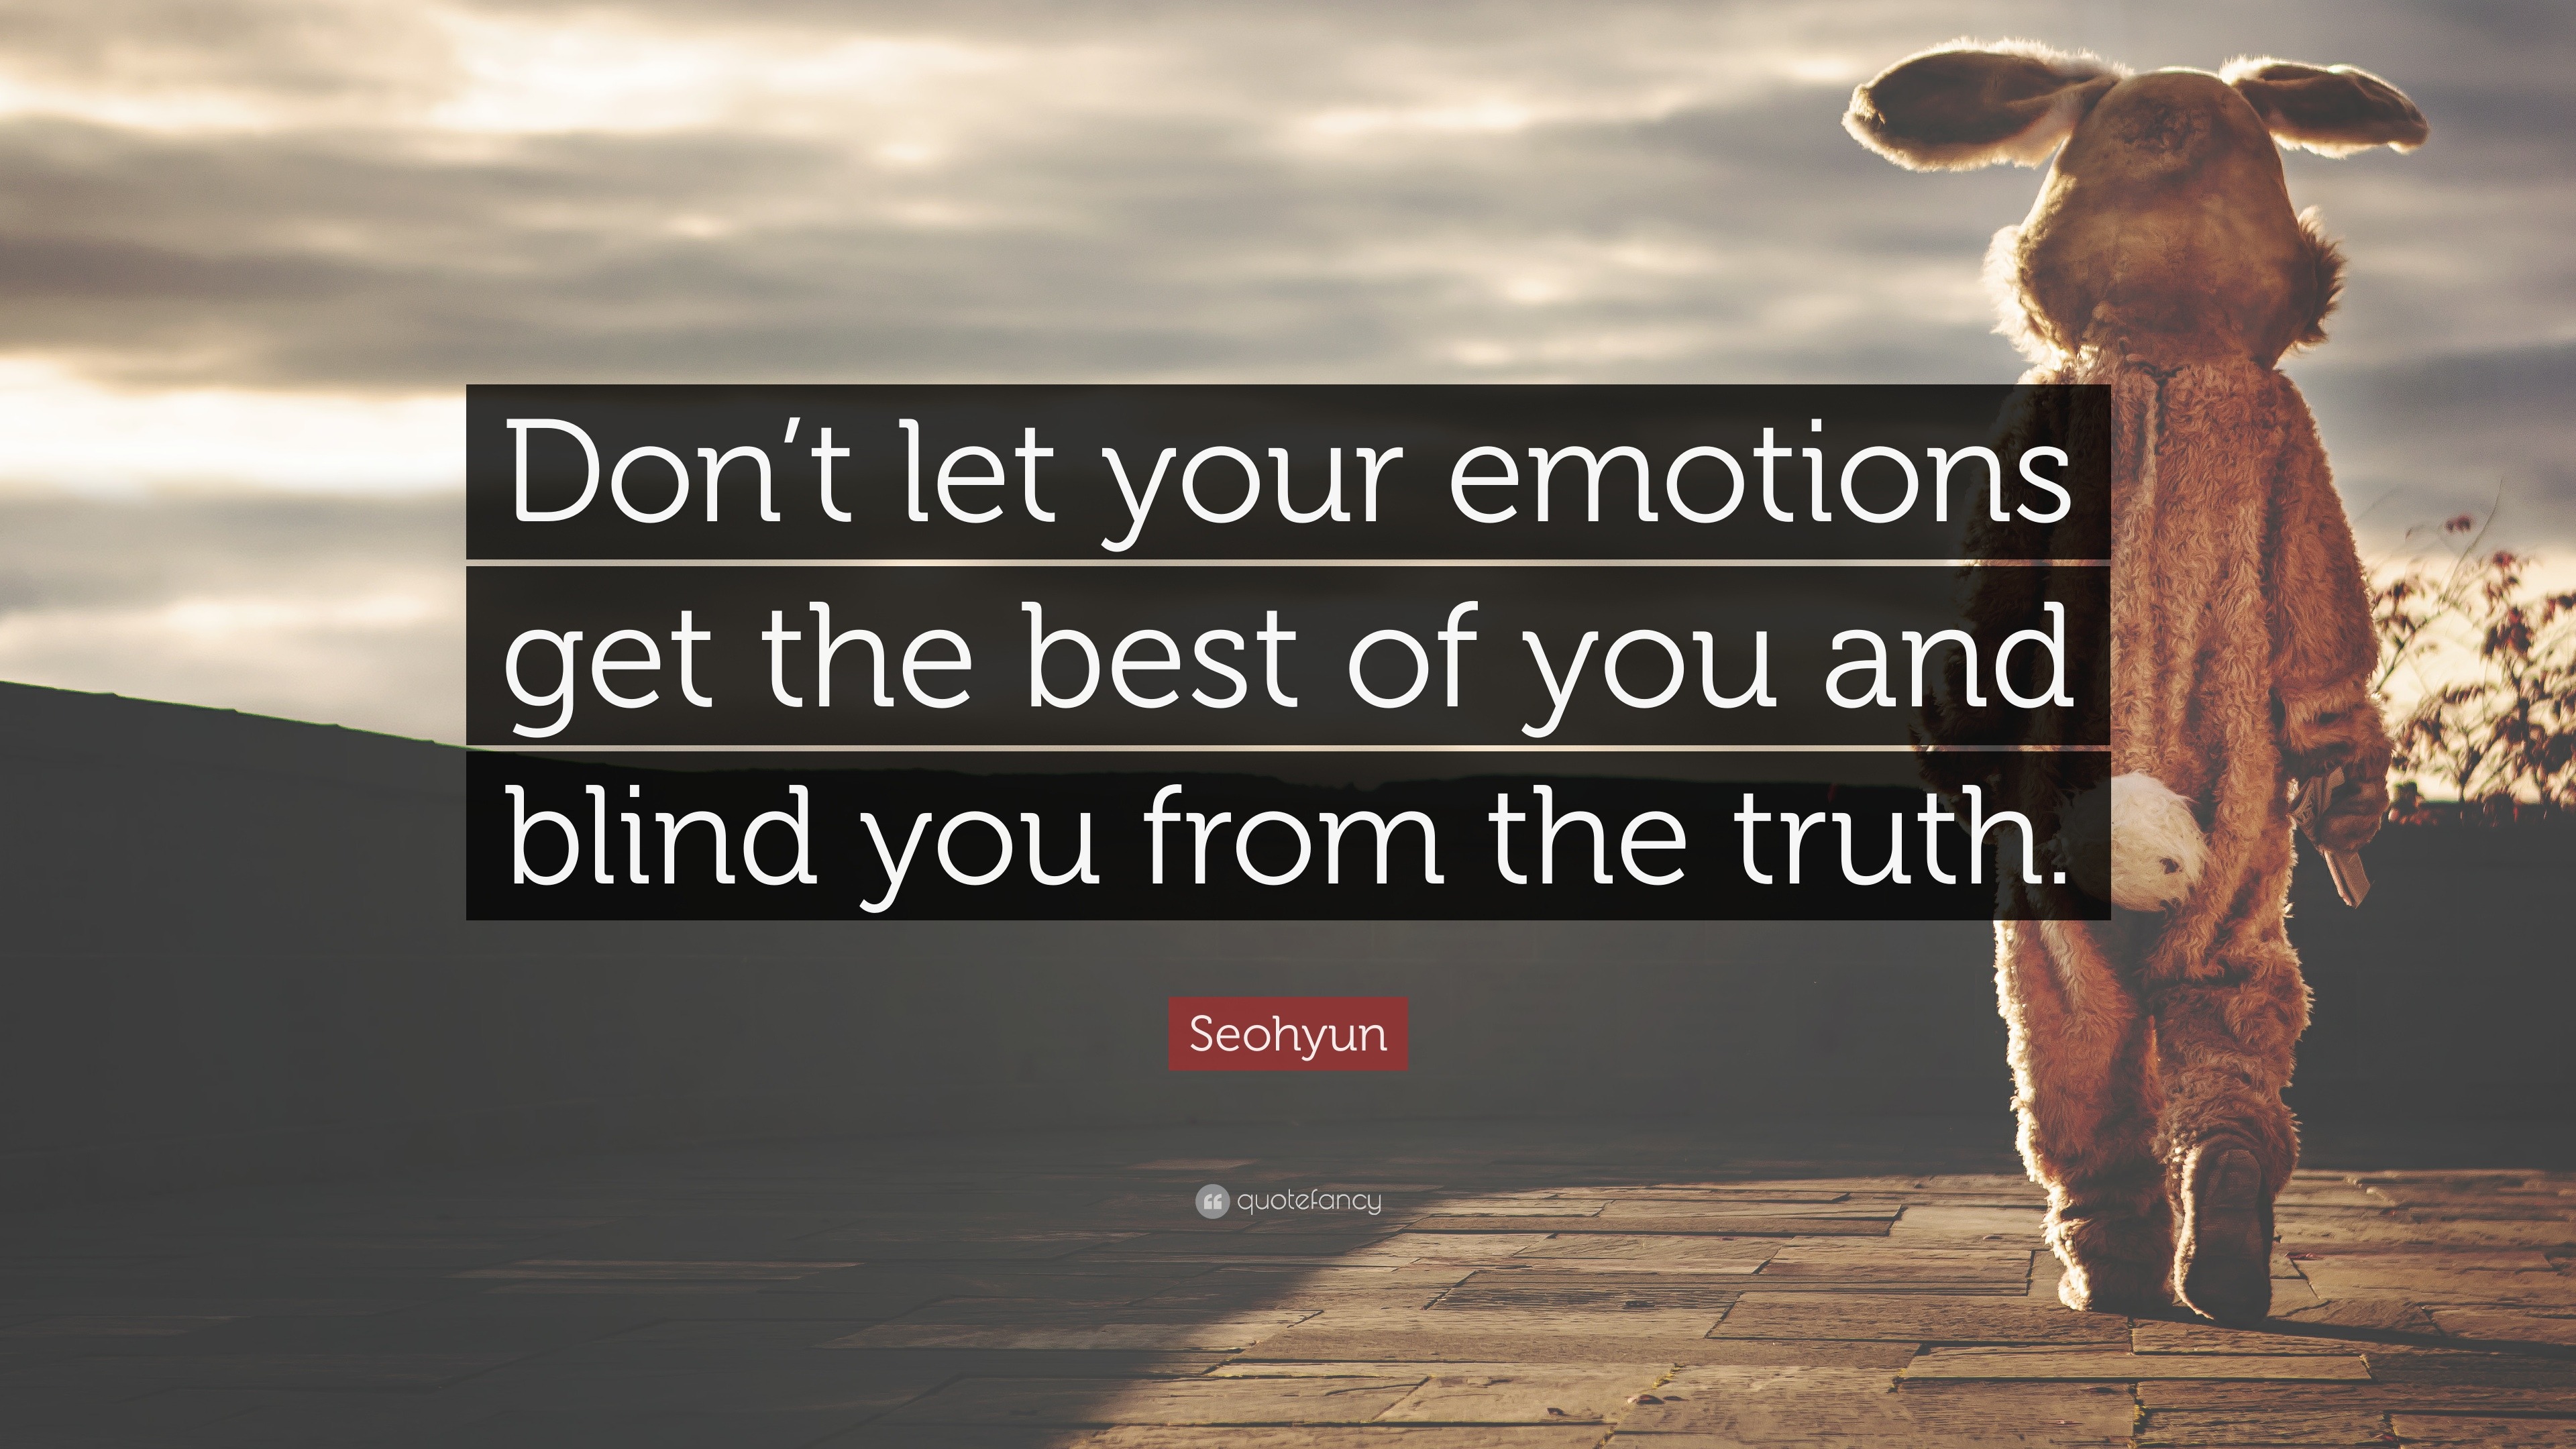 Seohyun Quote: “Don't let your emotions get the best of you and